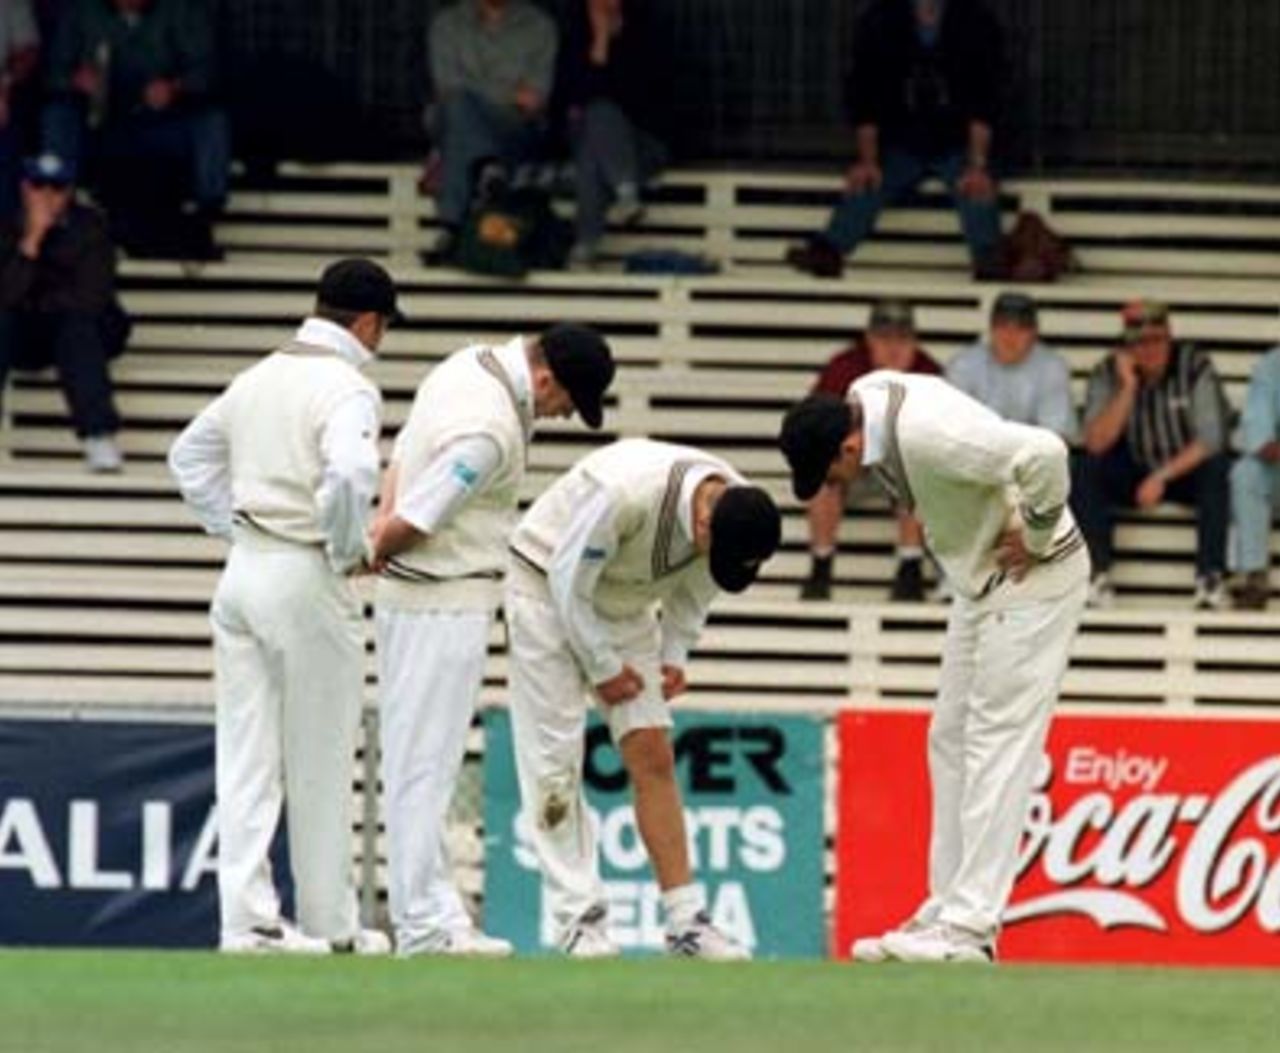 The Kiwis check out Vettori's injured leg before he was taken to hospital for X-Rays during the 2nd day of the 3rd Test between Australia and New Zealand at Bellerive Oval in Tasmania. 28 November 1997